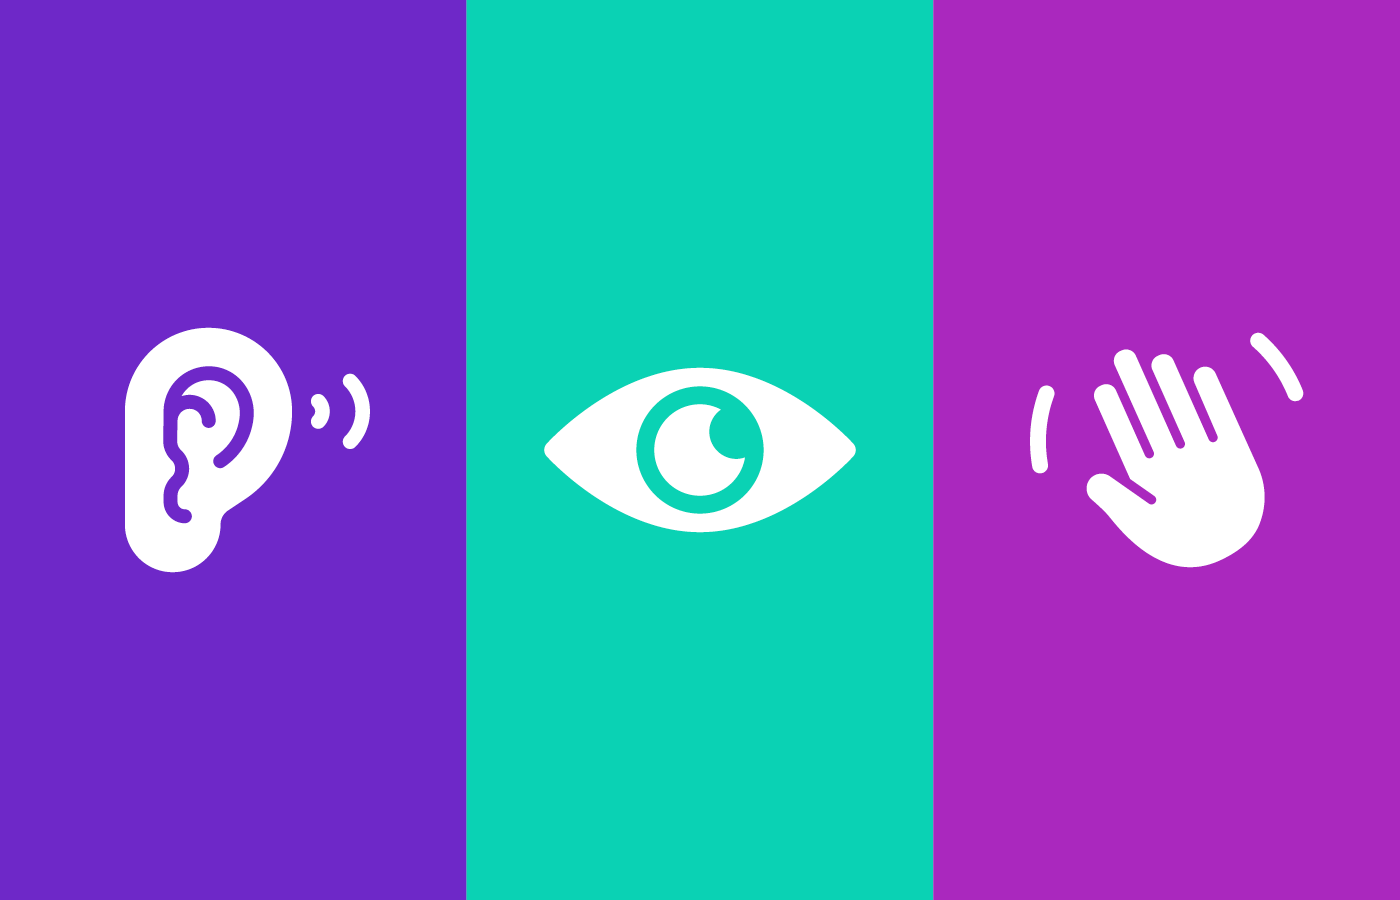 Icons to depict sound, sight and touch